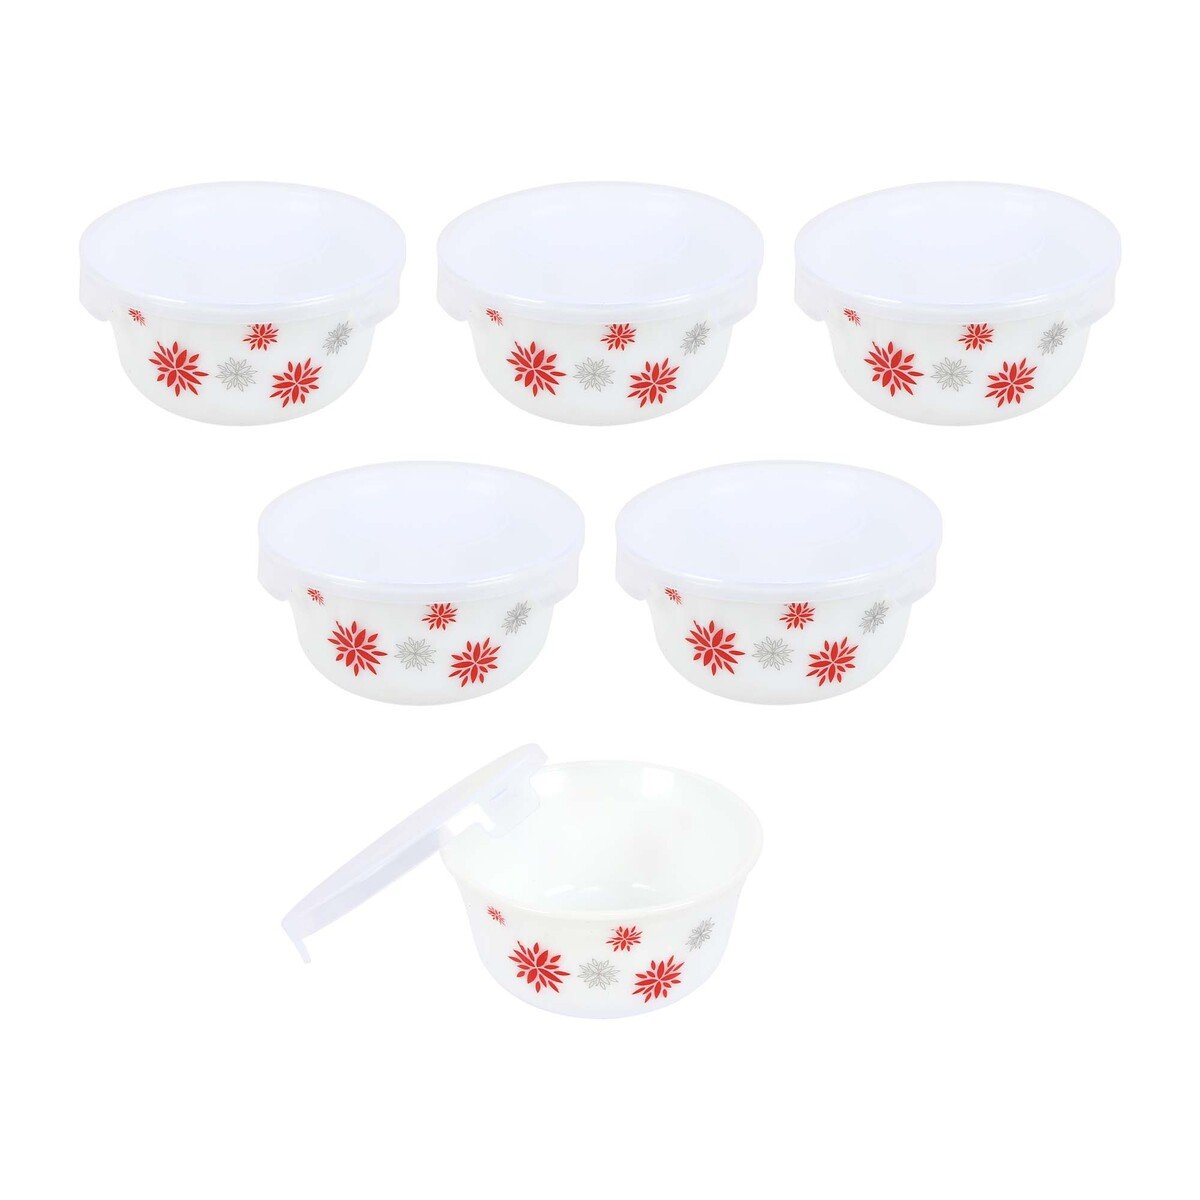 Cello Imperial Stor bowl 6pcs Set 8.4cm with Lid Magical Star